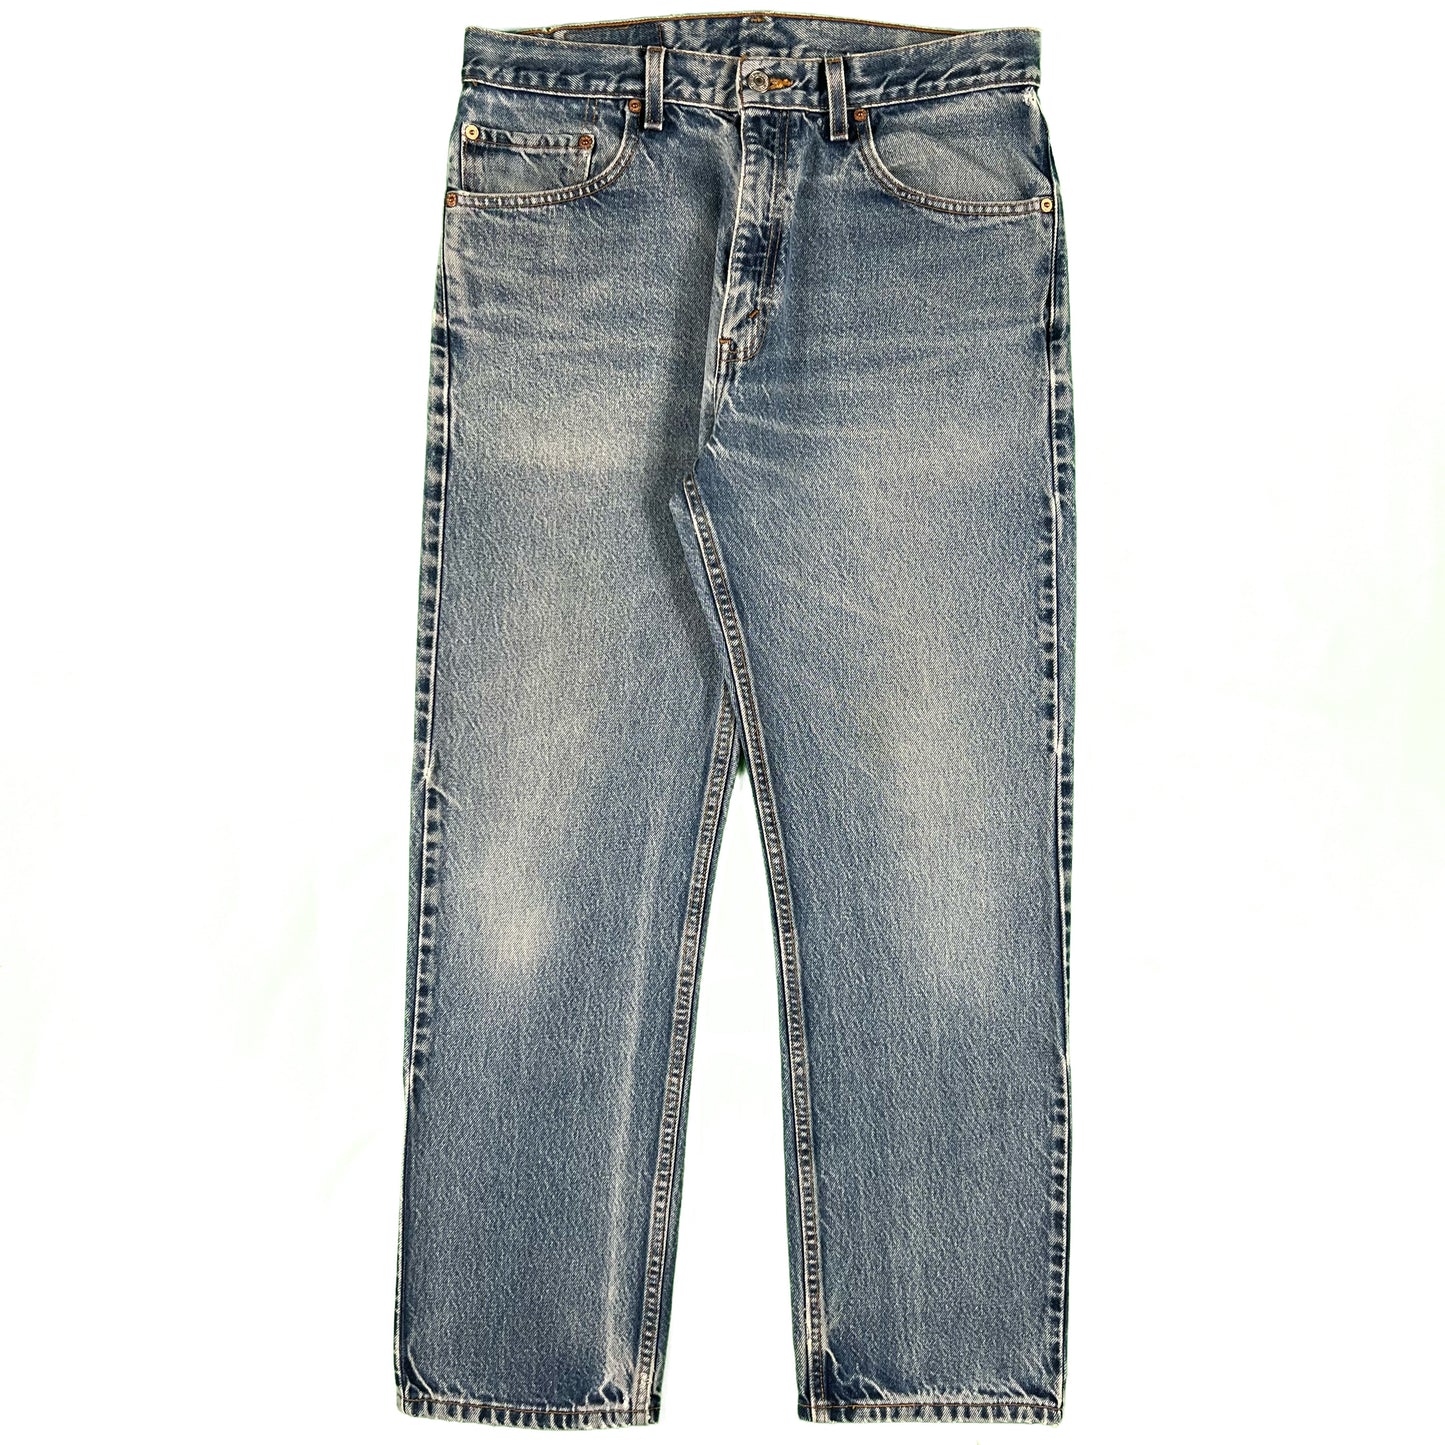 90s Levi's 505 2 Pack-(33x29/30)